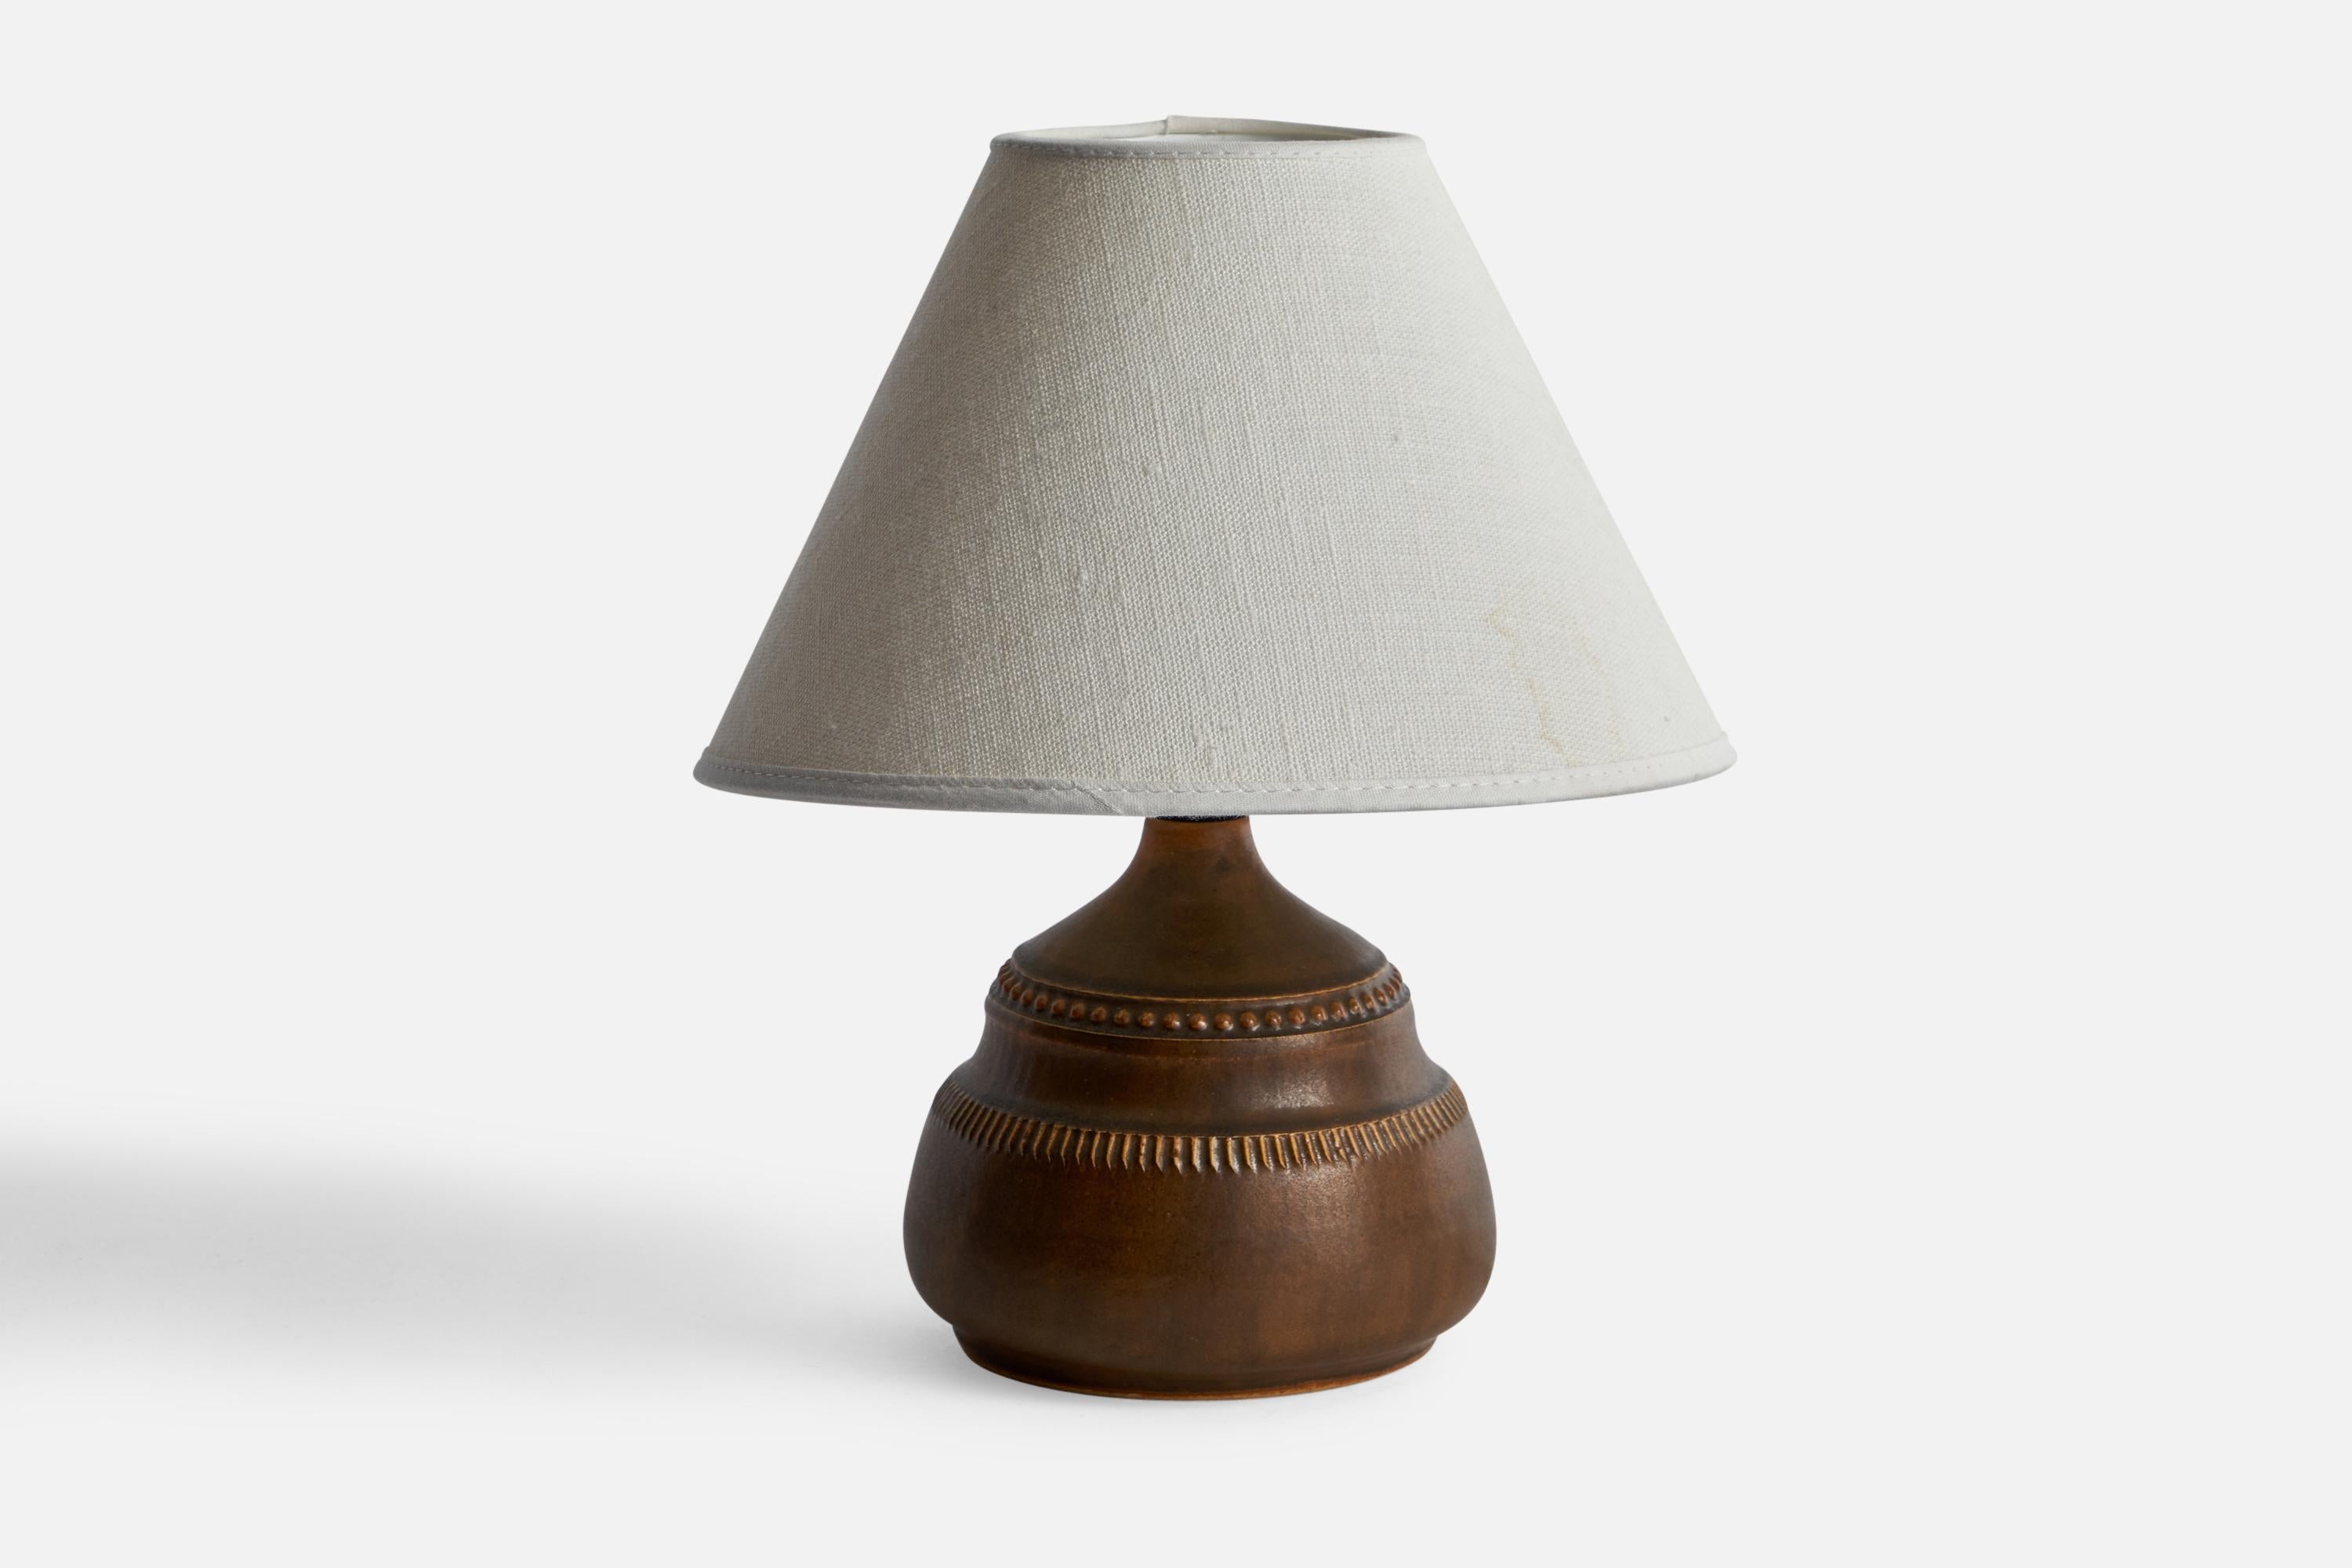 A brown-glazed stoneware table lamp designed and produced by Klase Höganäs, Sweden, 1960s.

Dimensions of Lamp (inches): 6.25” H x 4.63” Diameter
Dimensions of Shade (inches): 3” Top Diameter x 8” Bottom Diameter x 5” H
Dimensions of Lamp with Shade